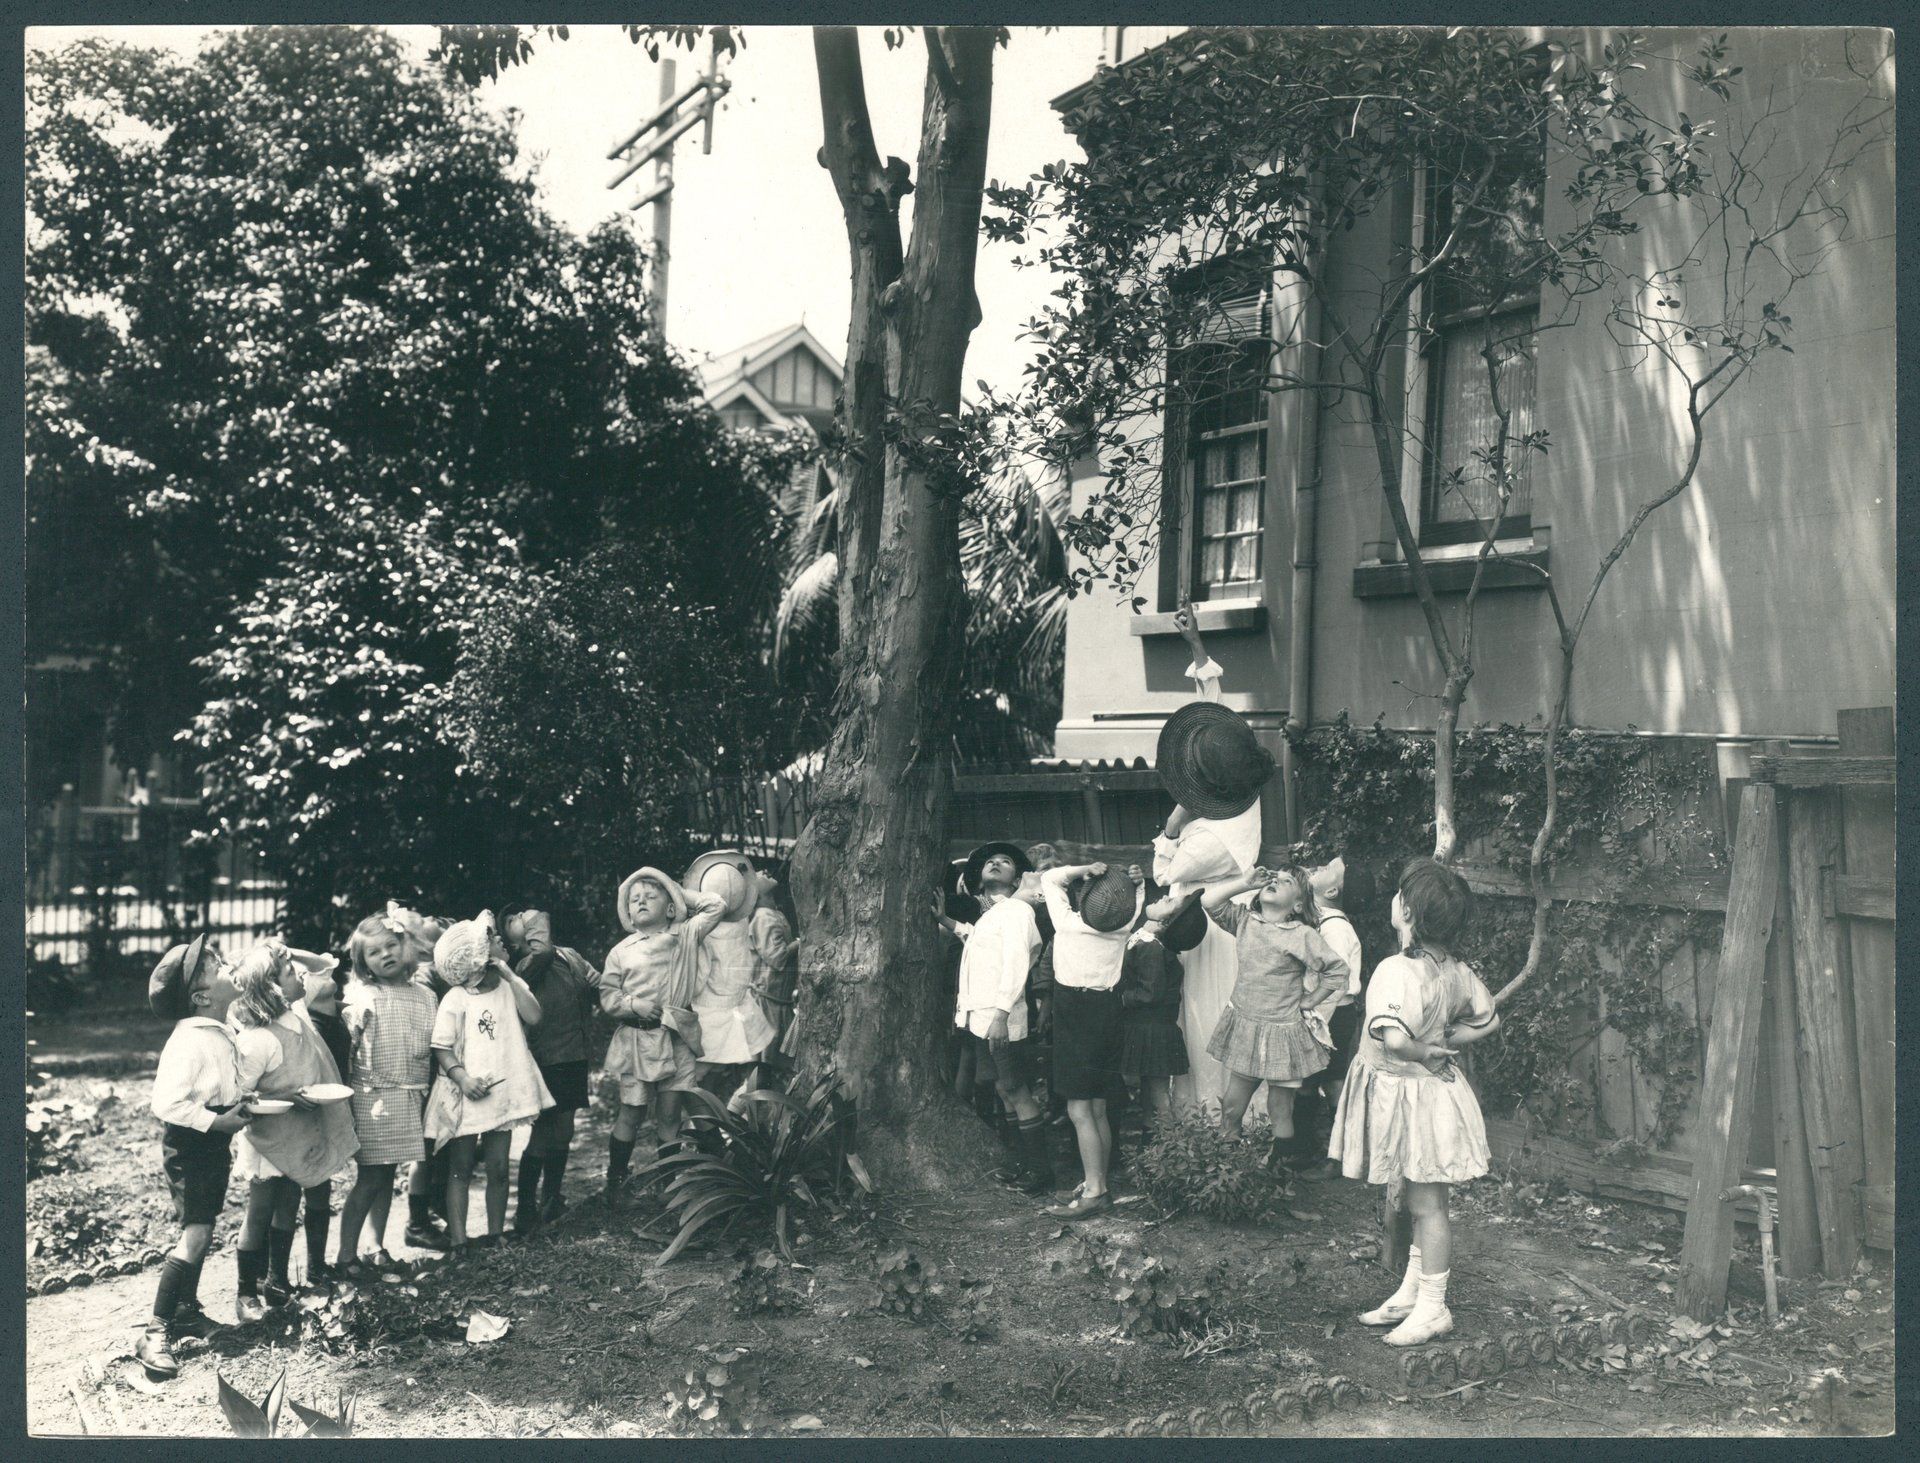 A teacher and children crowd around a tree, the teacher is pointing up at the tree and the children hold onto their hats as they look up.